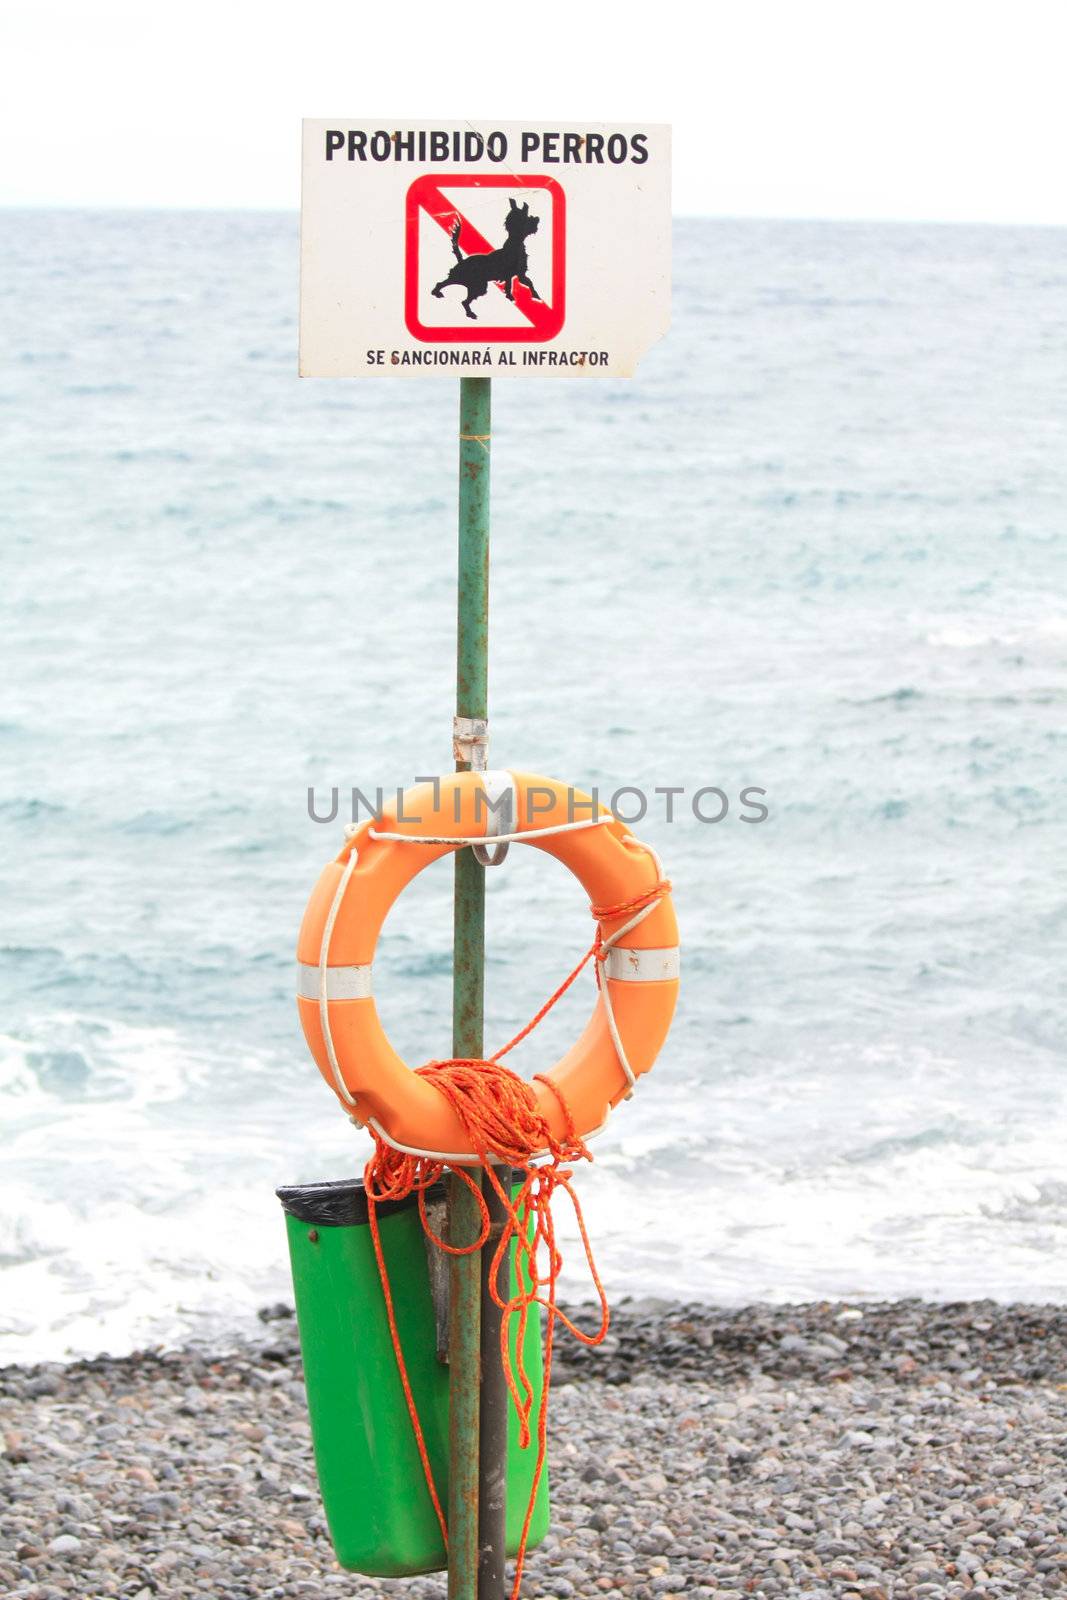 A life saver, a garbage bin and a sign telling that dogs are not allowed on the beach